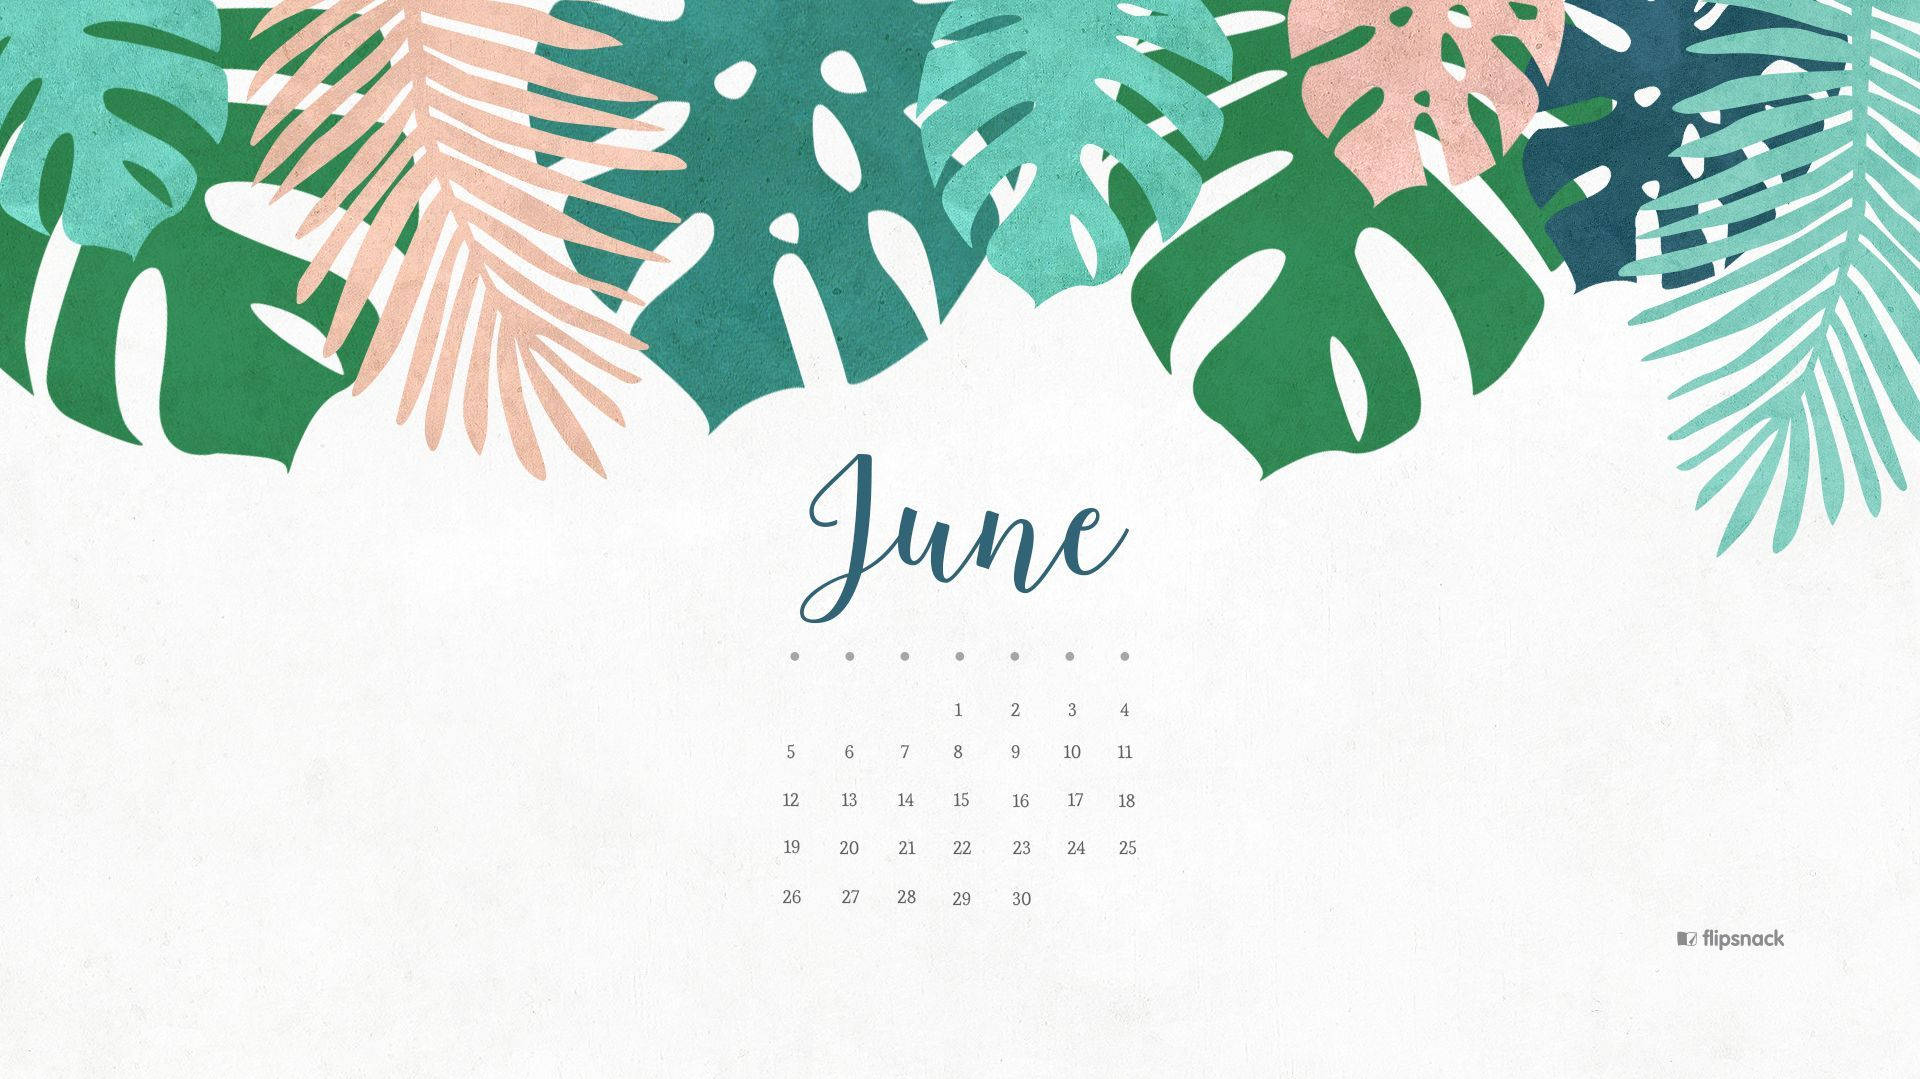 Enjoying The Summer Days With June's Tropical Escape Background